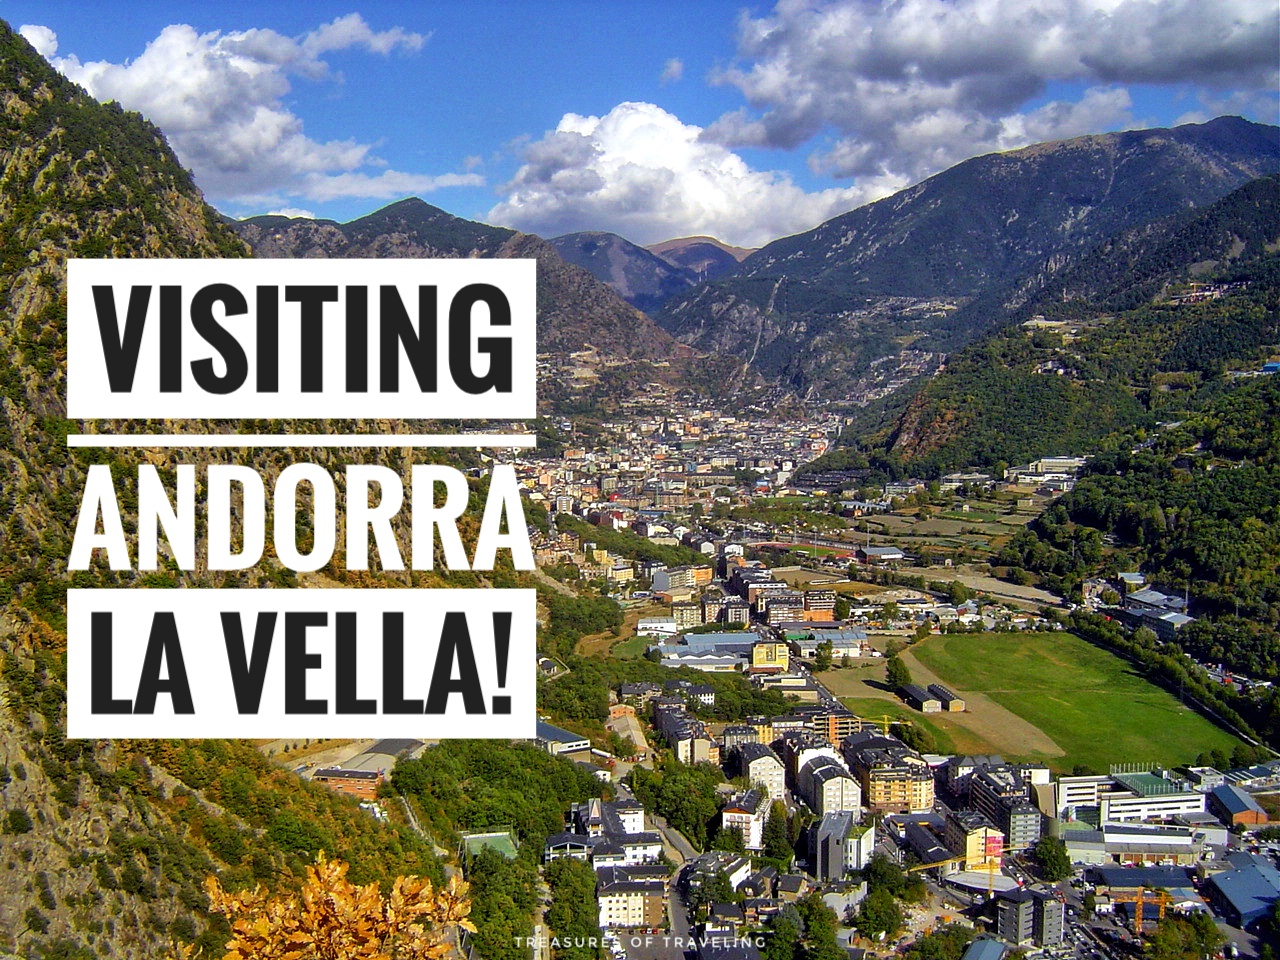 Have you heard of #Andorra before? If you don’t live in #Europe, most likely you haven’t heard of this small landlocked country located between Spain and France in the eastern #PyreneesMountains. Discover the #TreasuresOfTraveling in this tiny country!